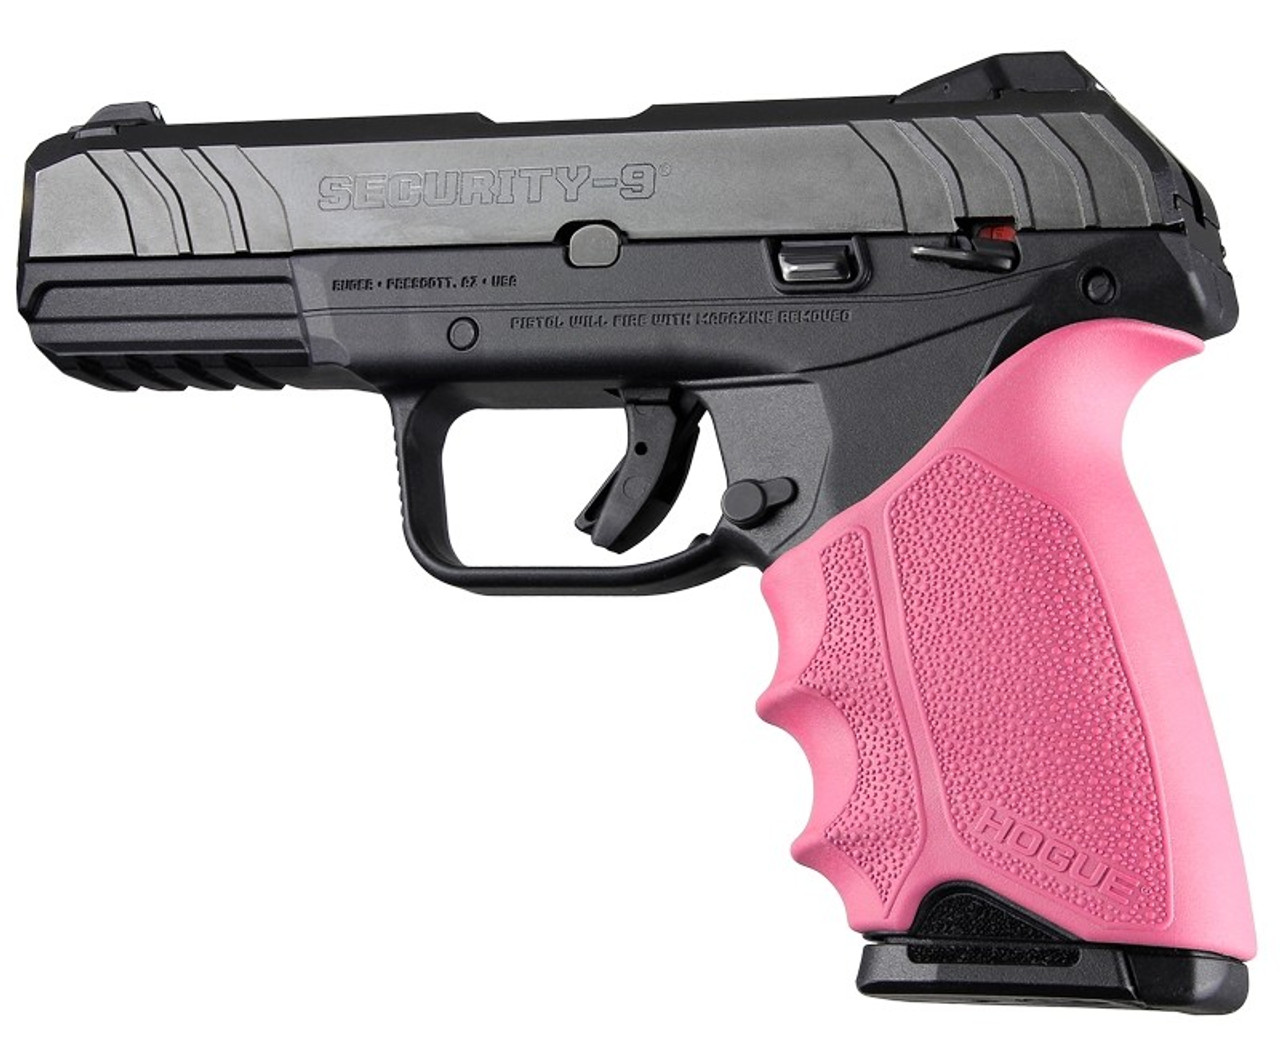 Hogue 17707 HandAll Beavertail Grip Sleeve Ruger Security 9 Pink